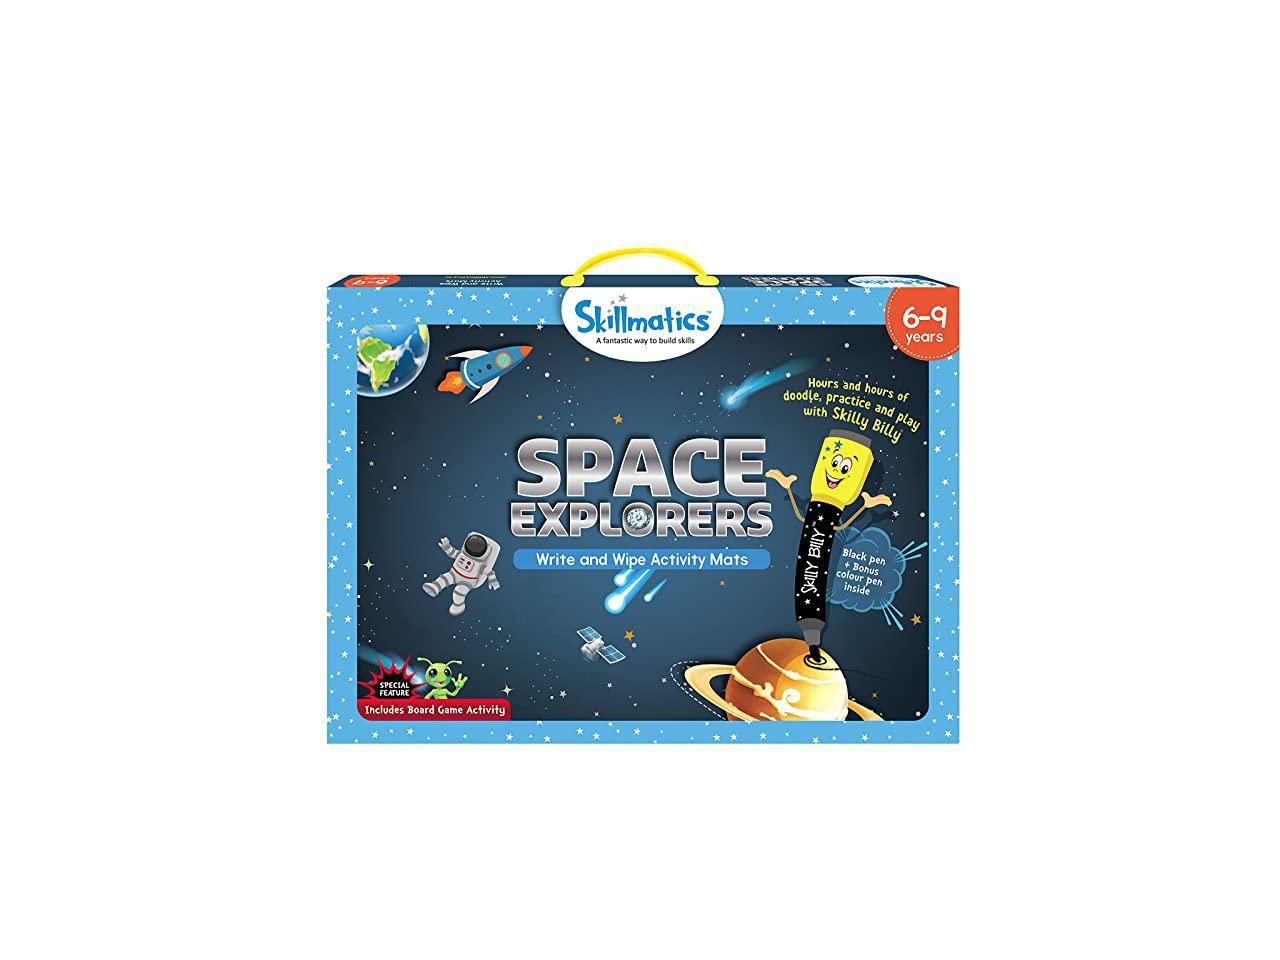 9 Years 8 Learning Tools for Boys and Girls 6 | Erasable and Reusable Activity Mats with 2 Dry Erase Markers 6-9 Years Skillmatics Educational Game: Space Explorers 7 